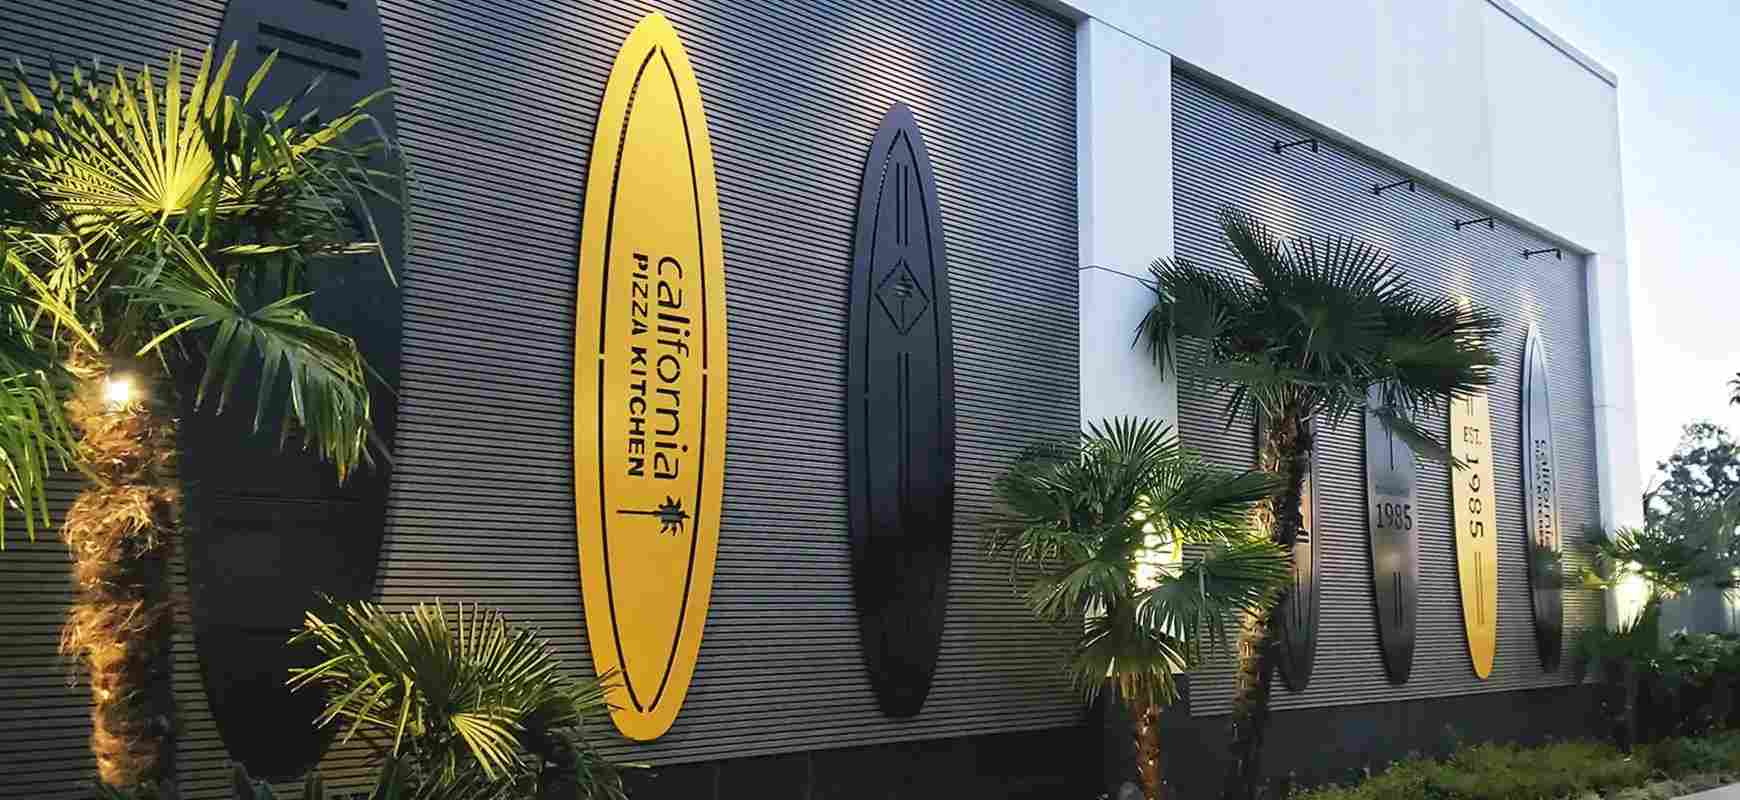 California Pizza Kitchen custom signs in surfboard shapes with aluminum, intended for branding